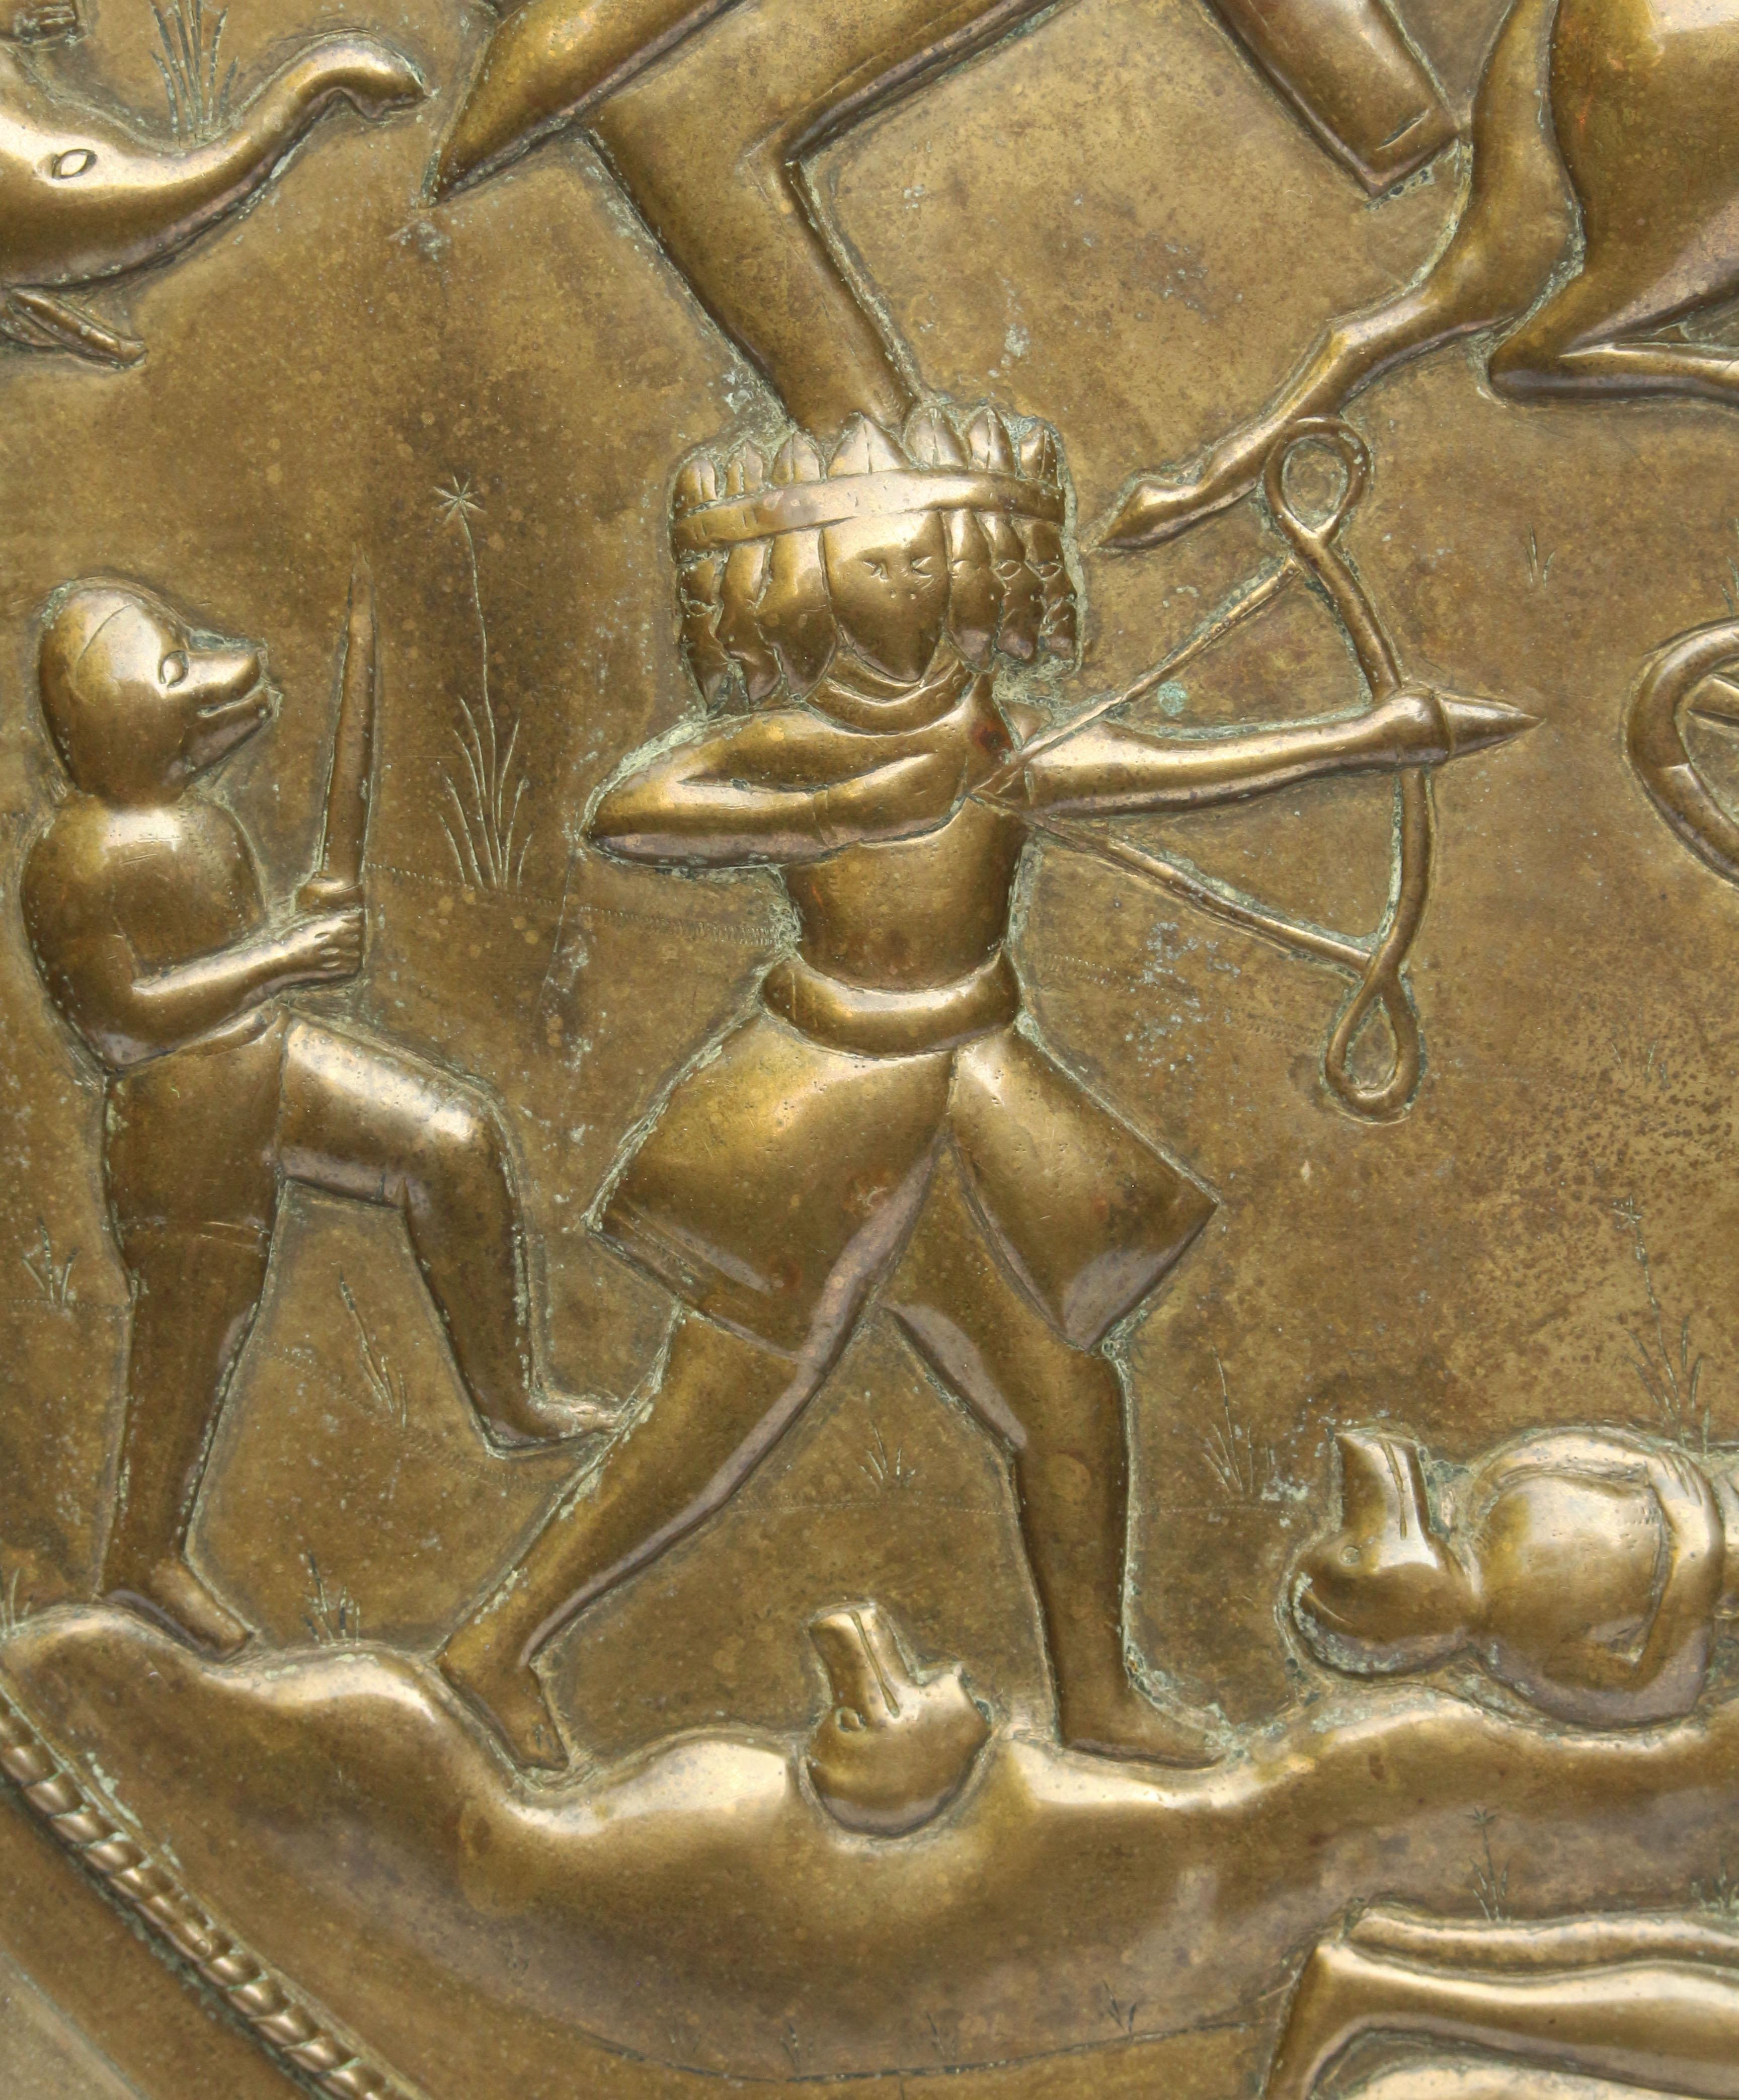 18th Century Patinated Brass Disc Depicting Scenes from the Ramayana